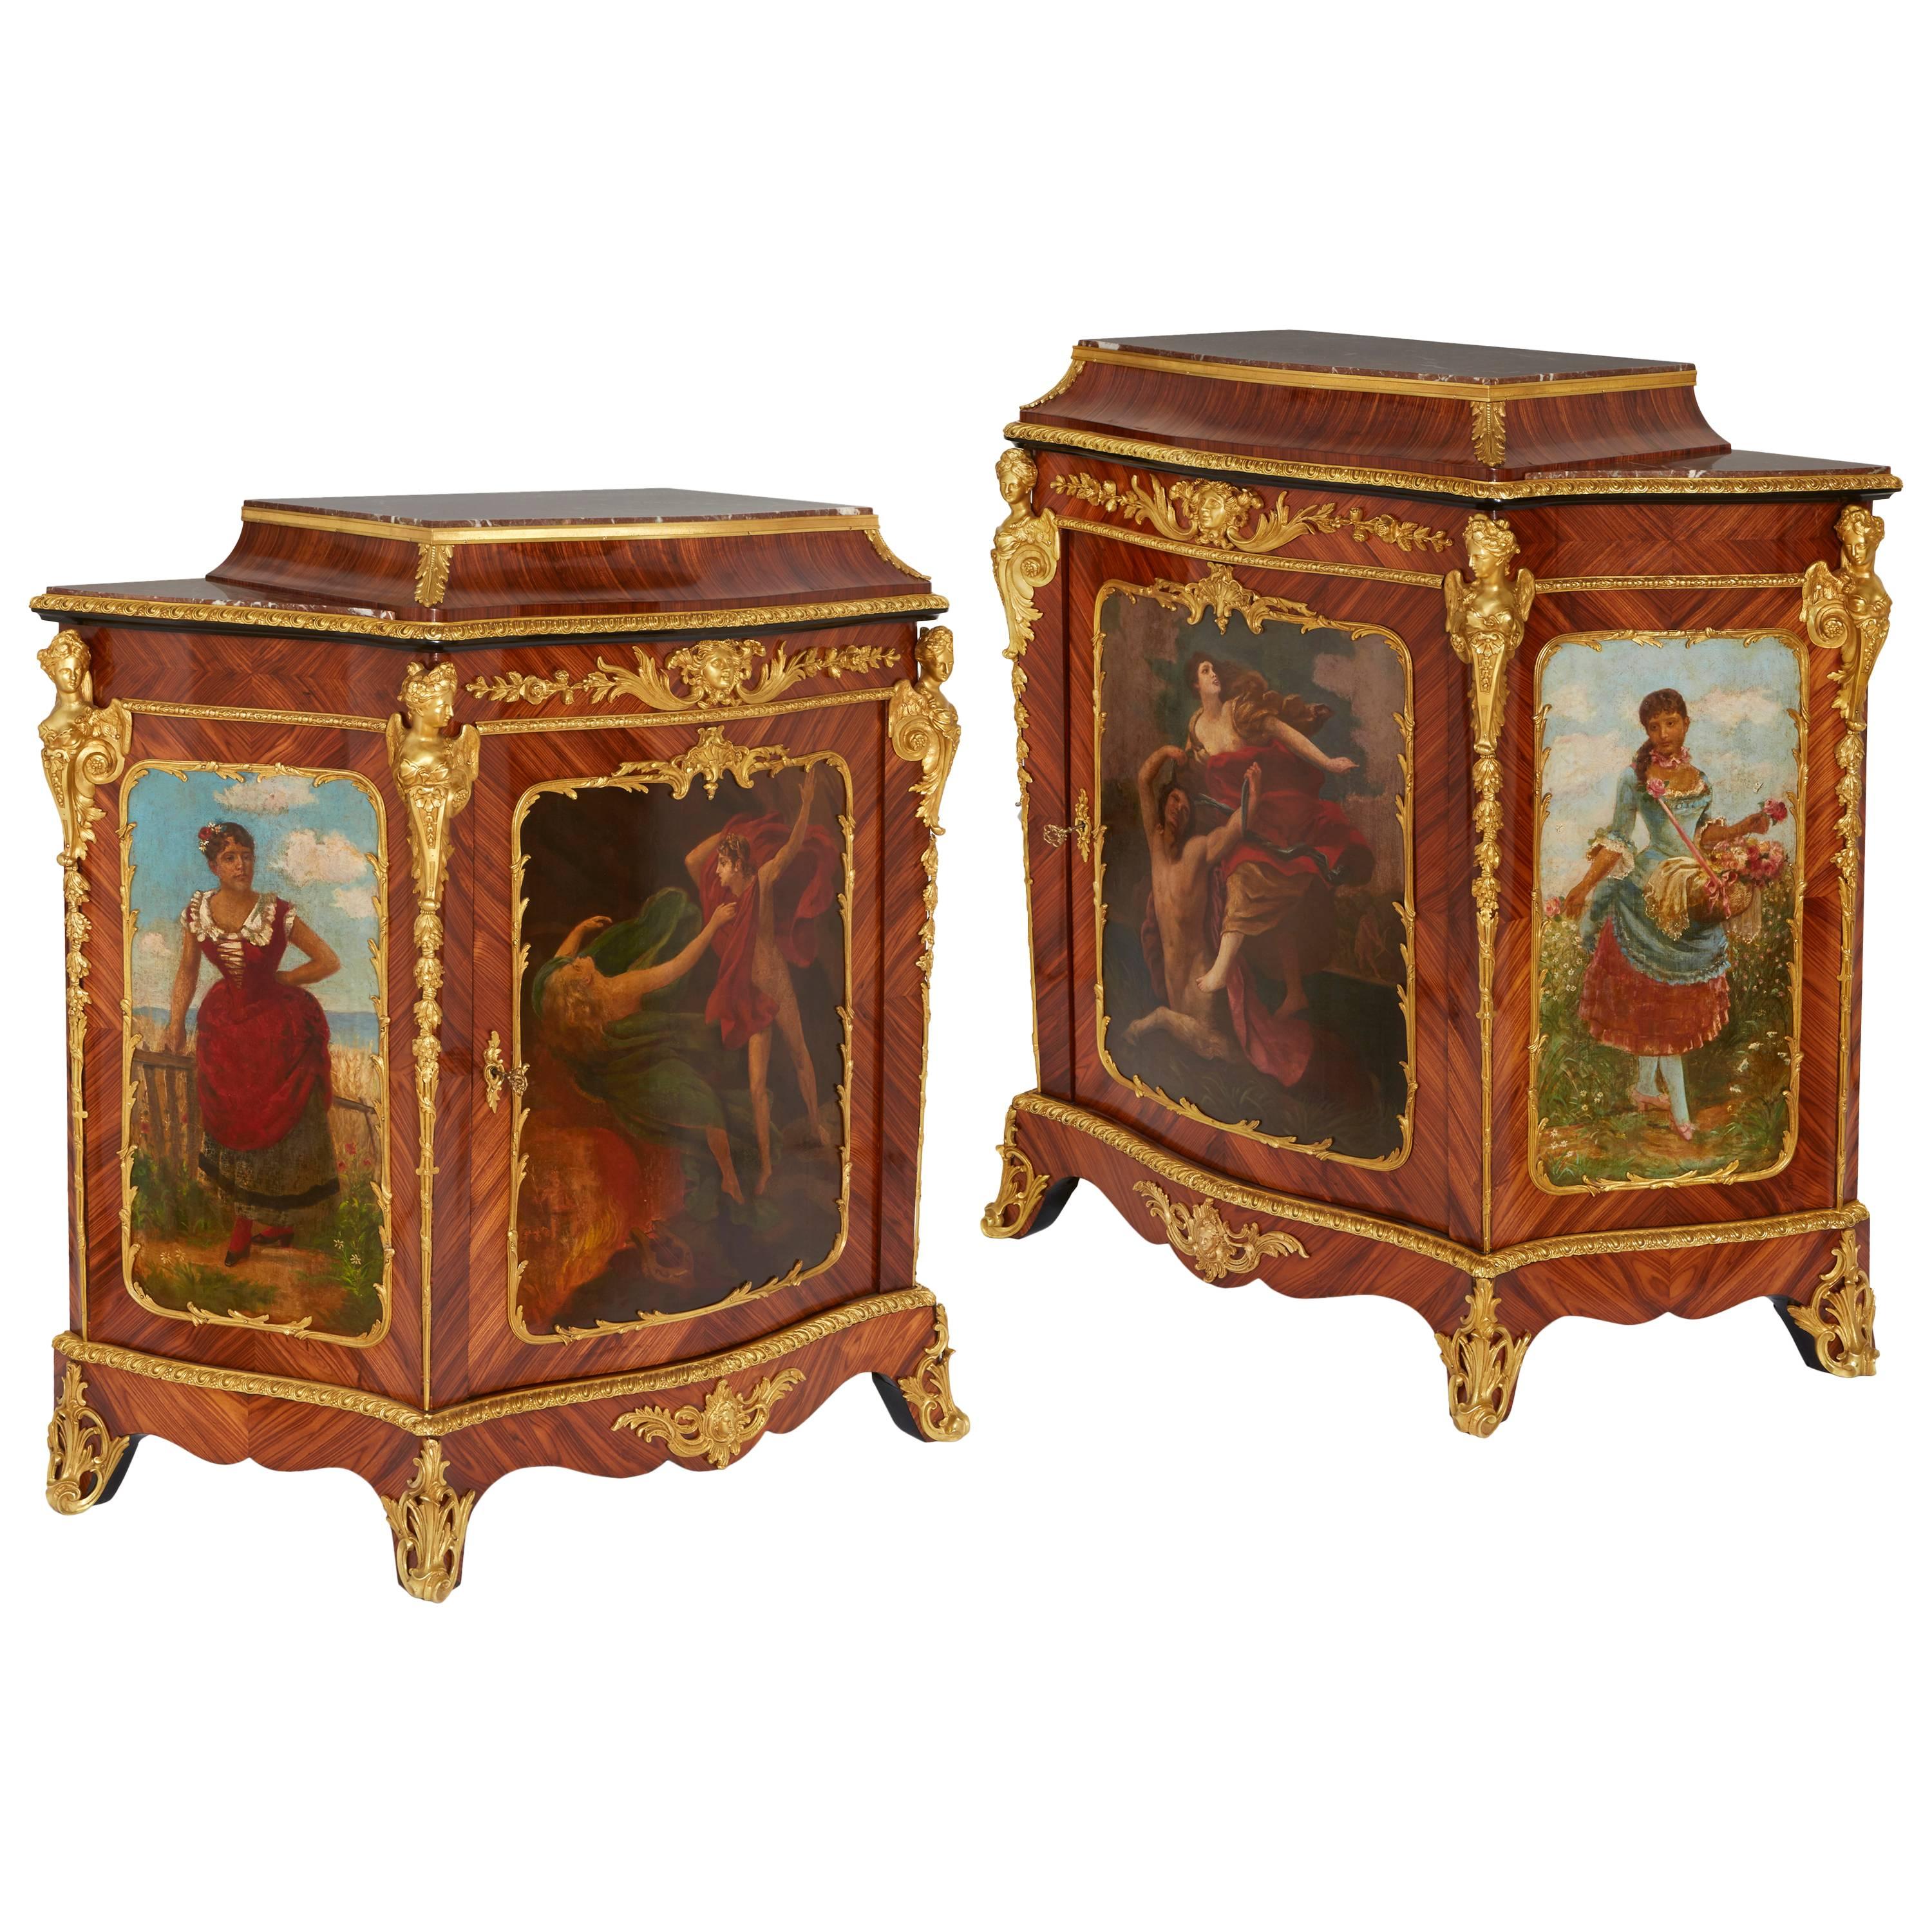 Pair of Rococo style painted tulipwood antique side cabinets